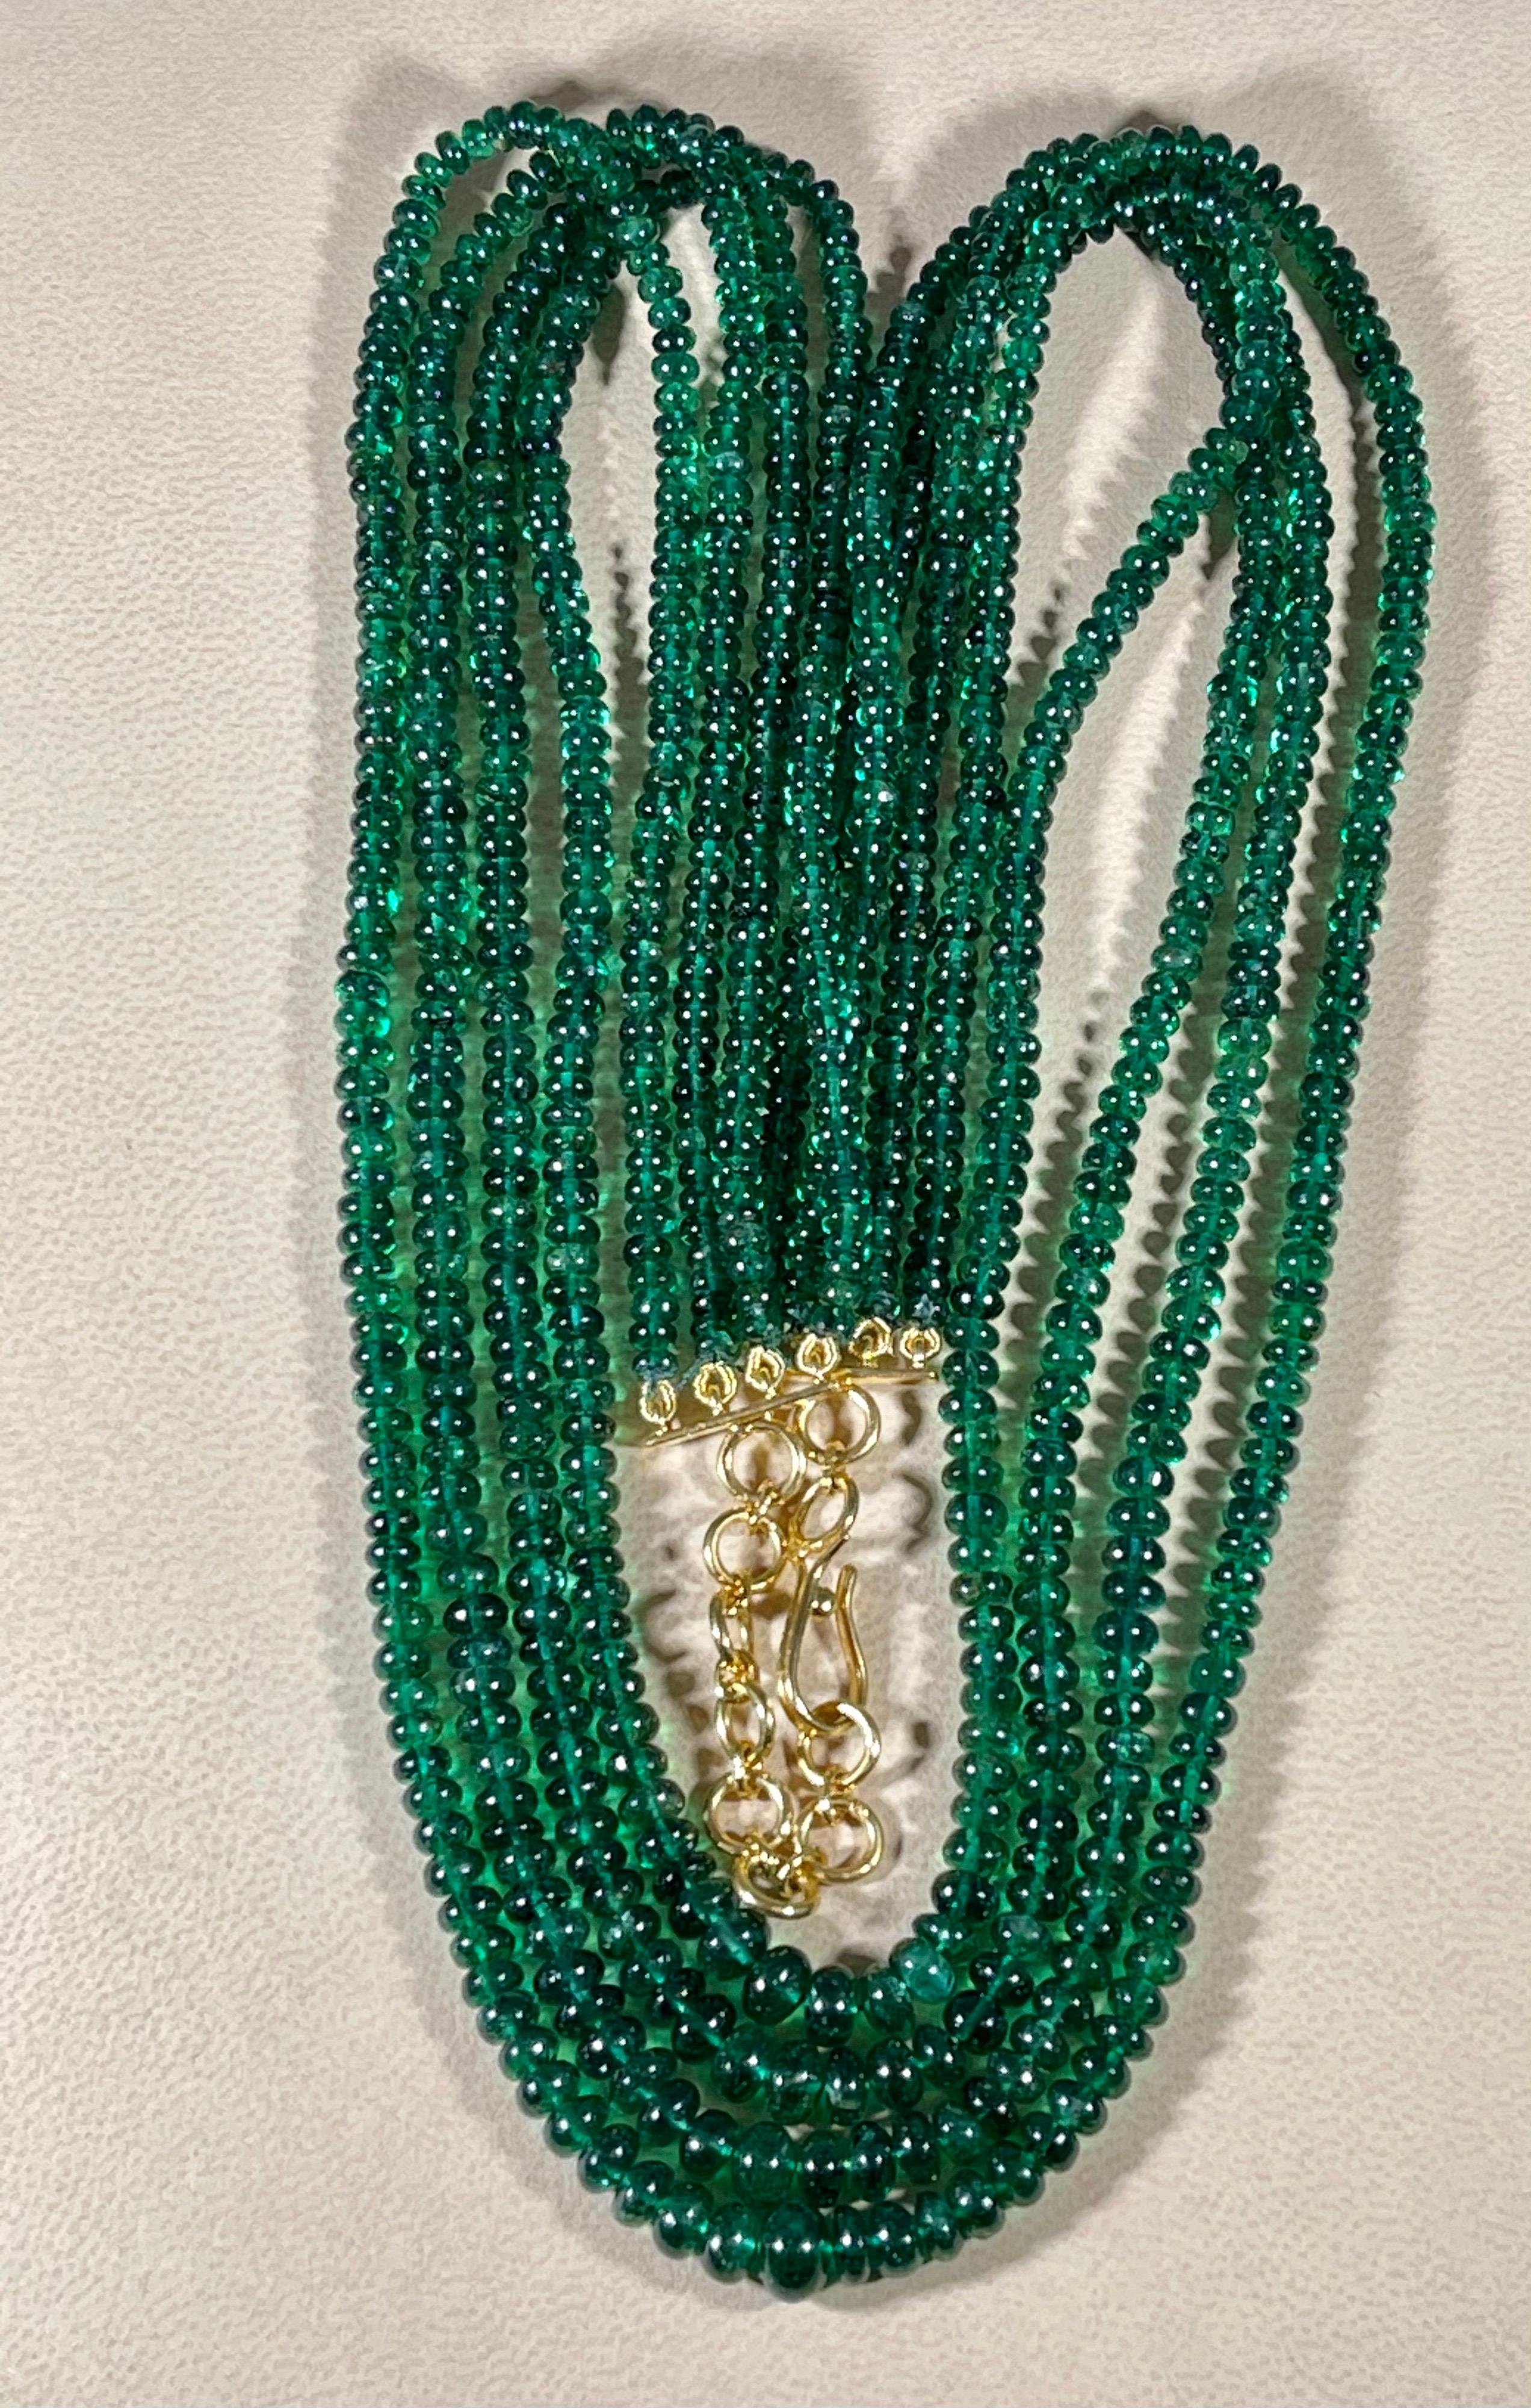 250ct Fine Emerald Beads 4 Line Necklace with 14 Kt Yellow Gold Clasp Adjustable For Sale 1